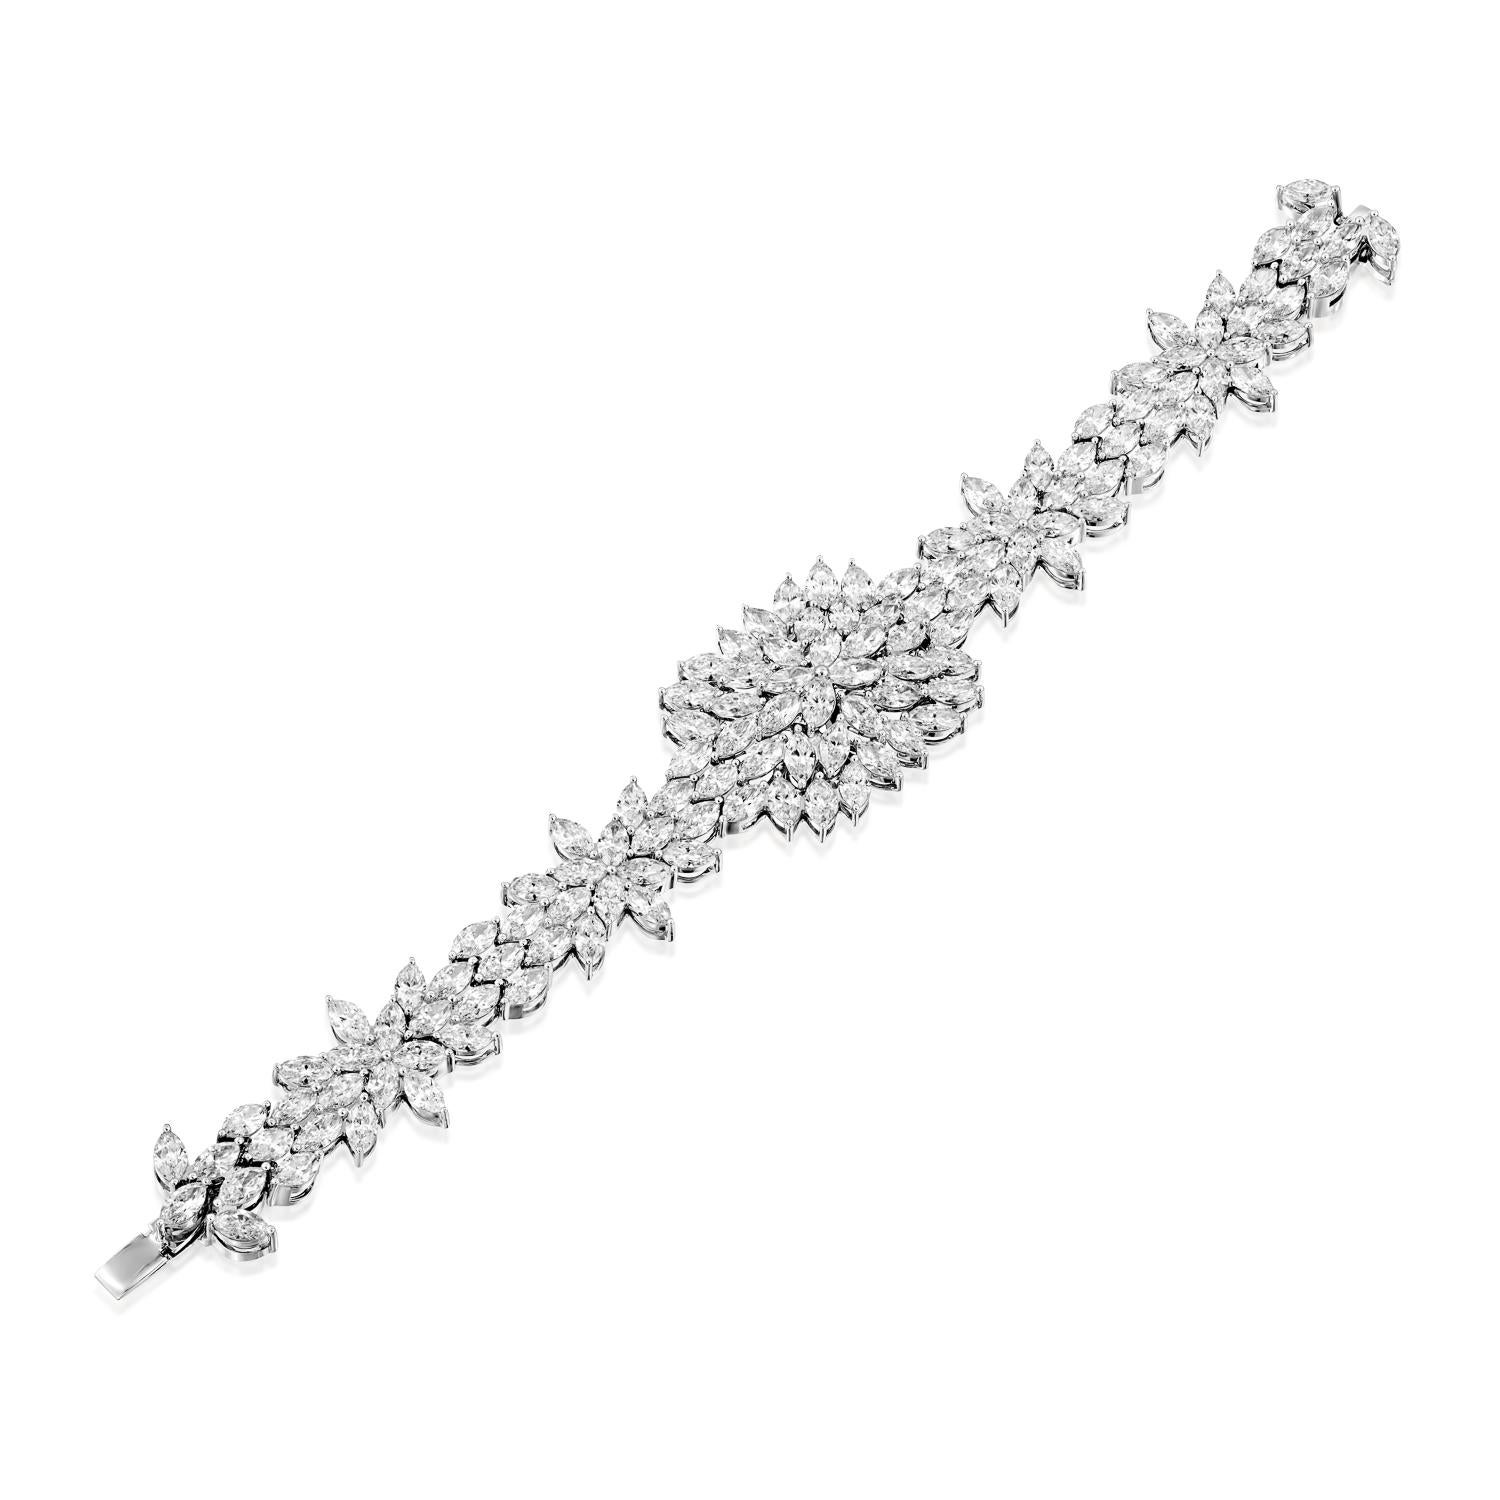 Add a touch of sophistication and glamour to your jewelry collection with the Geraldo 28.64 Carat Marquise Diamond White Gold Bracelet. This stunning bracelet features 28.64 carats of marquise diamonds, all of f/vs-vvs quality, and crafted from the